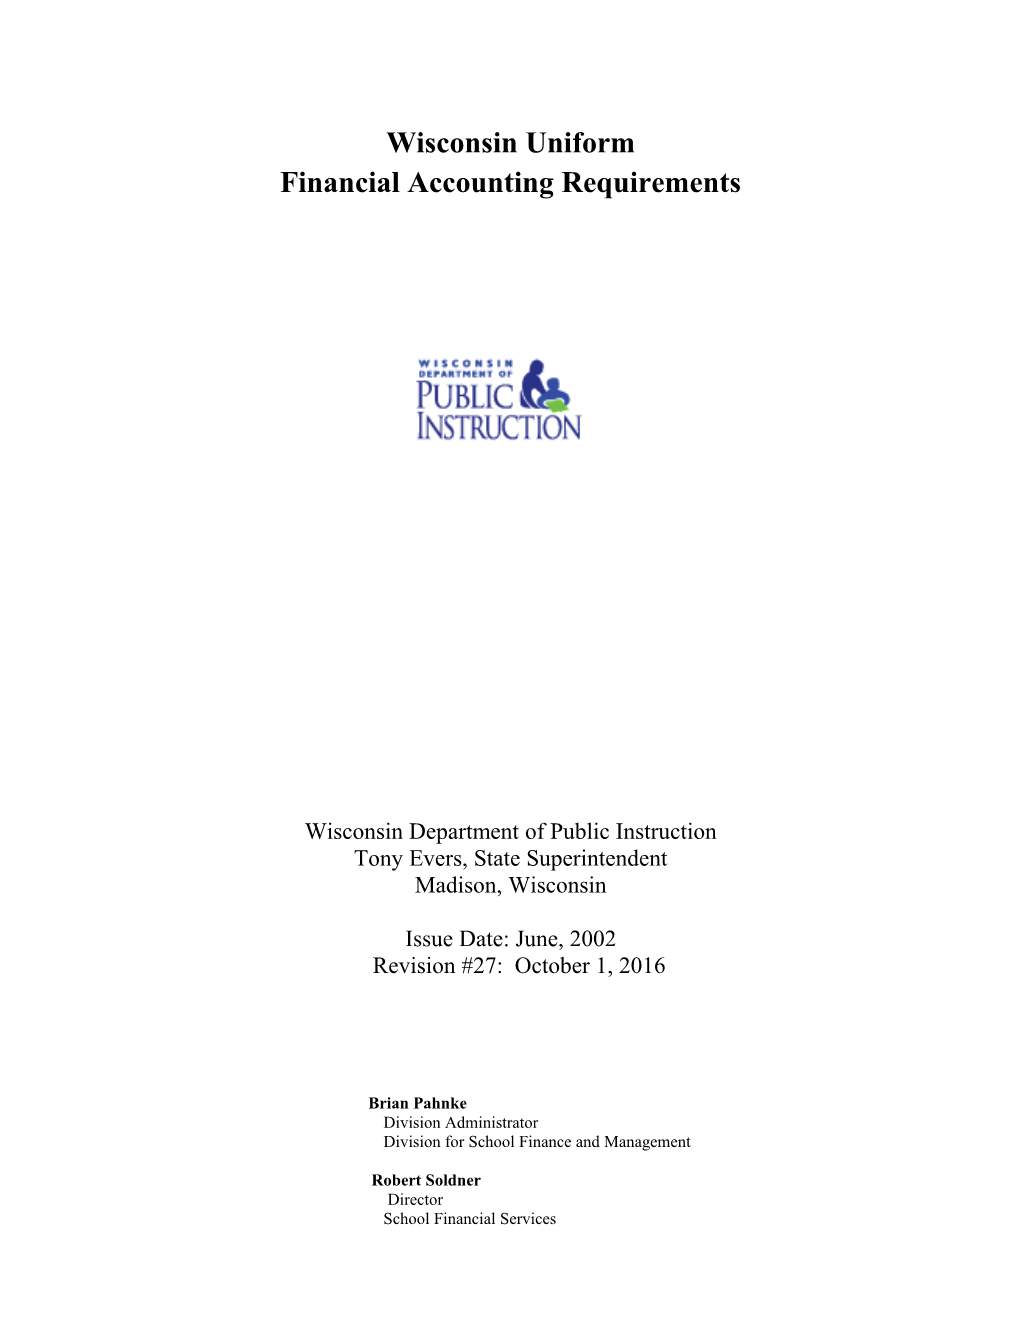 Financial Accounting Requirements